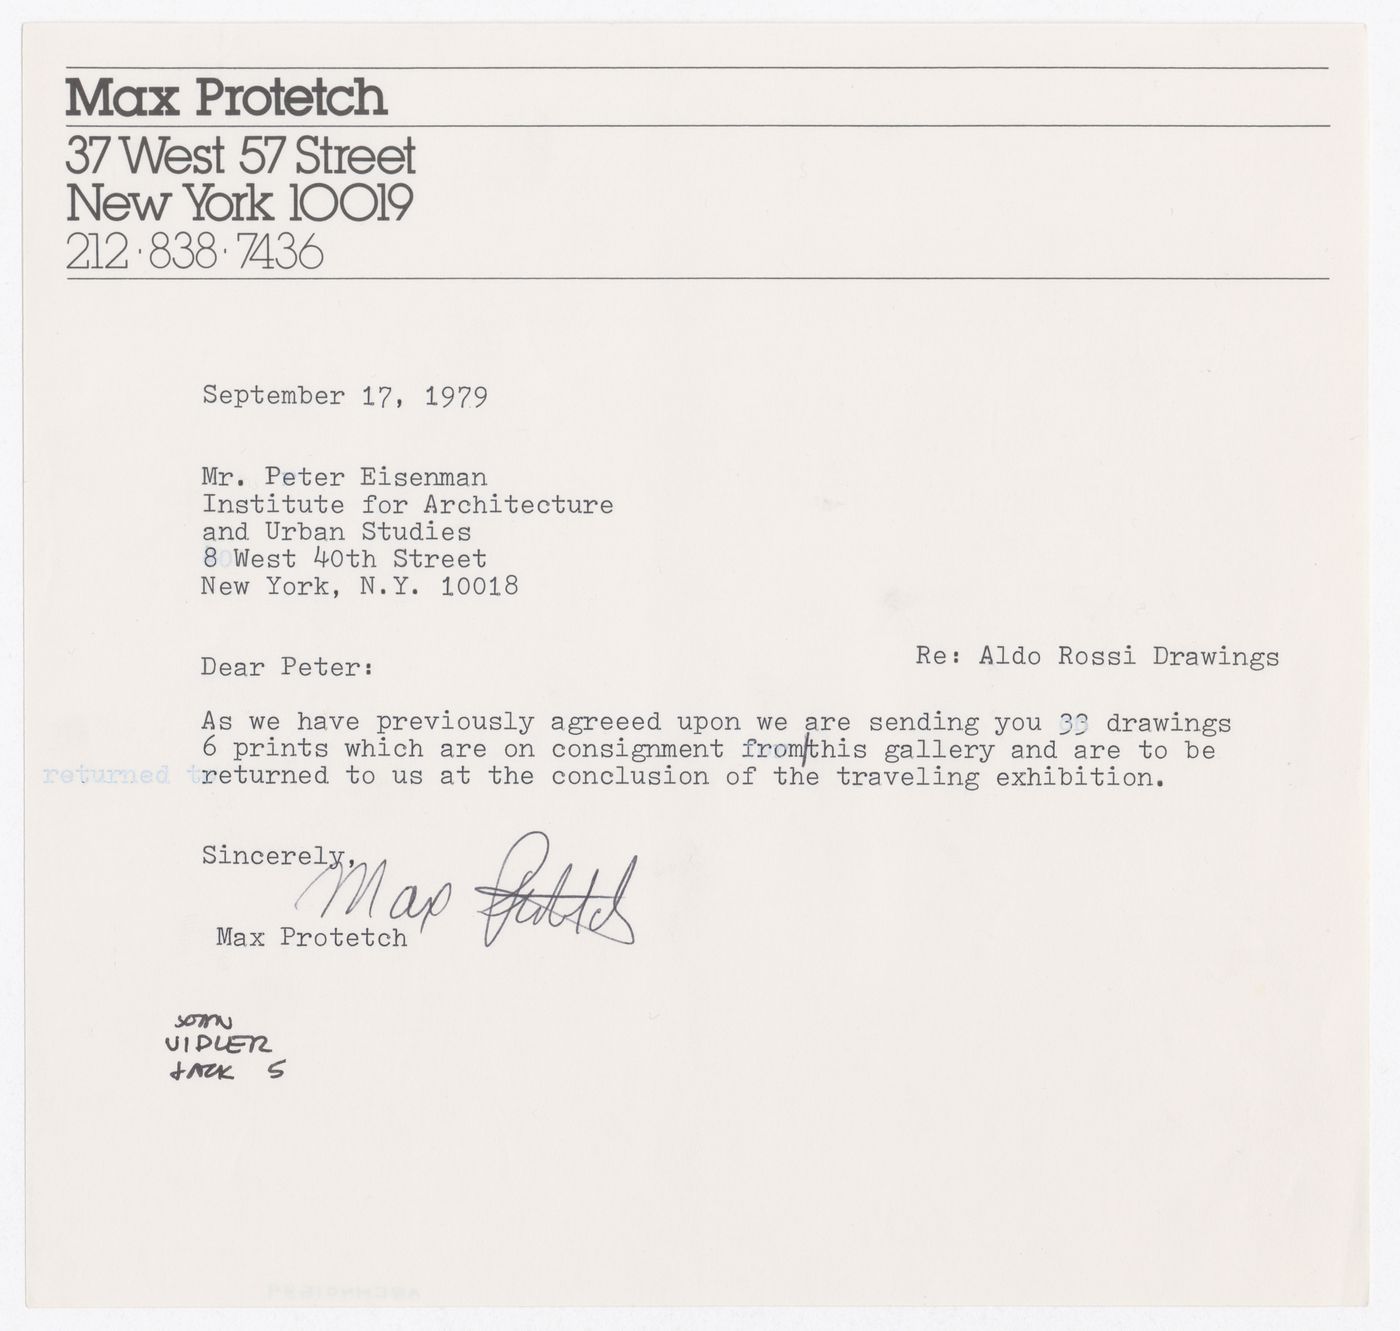 Letter from Max Protetch to Peter D. Eisenman about loan of Aldo Rossi drawings